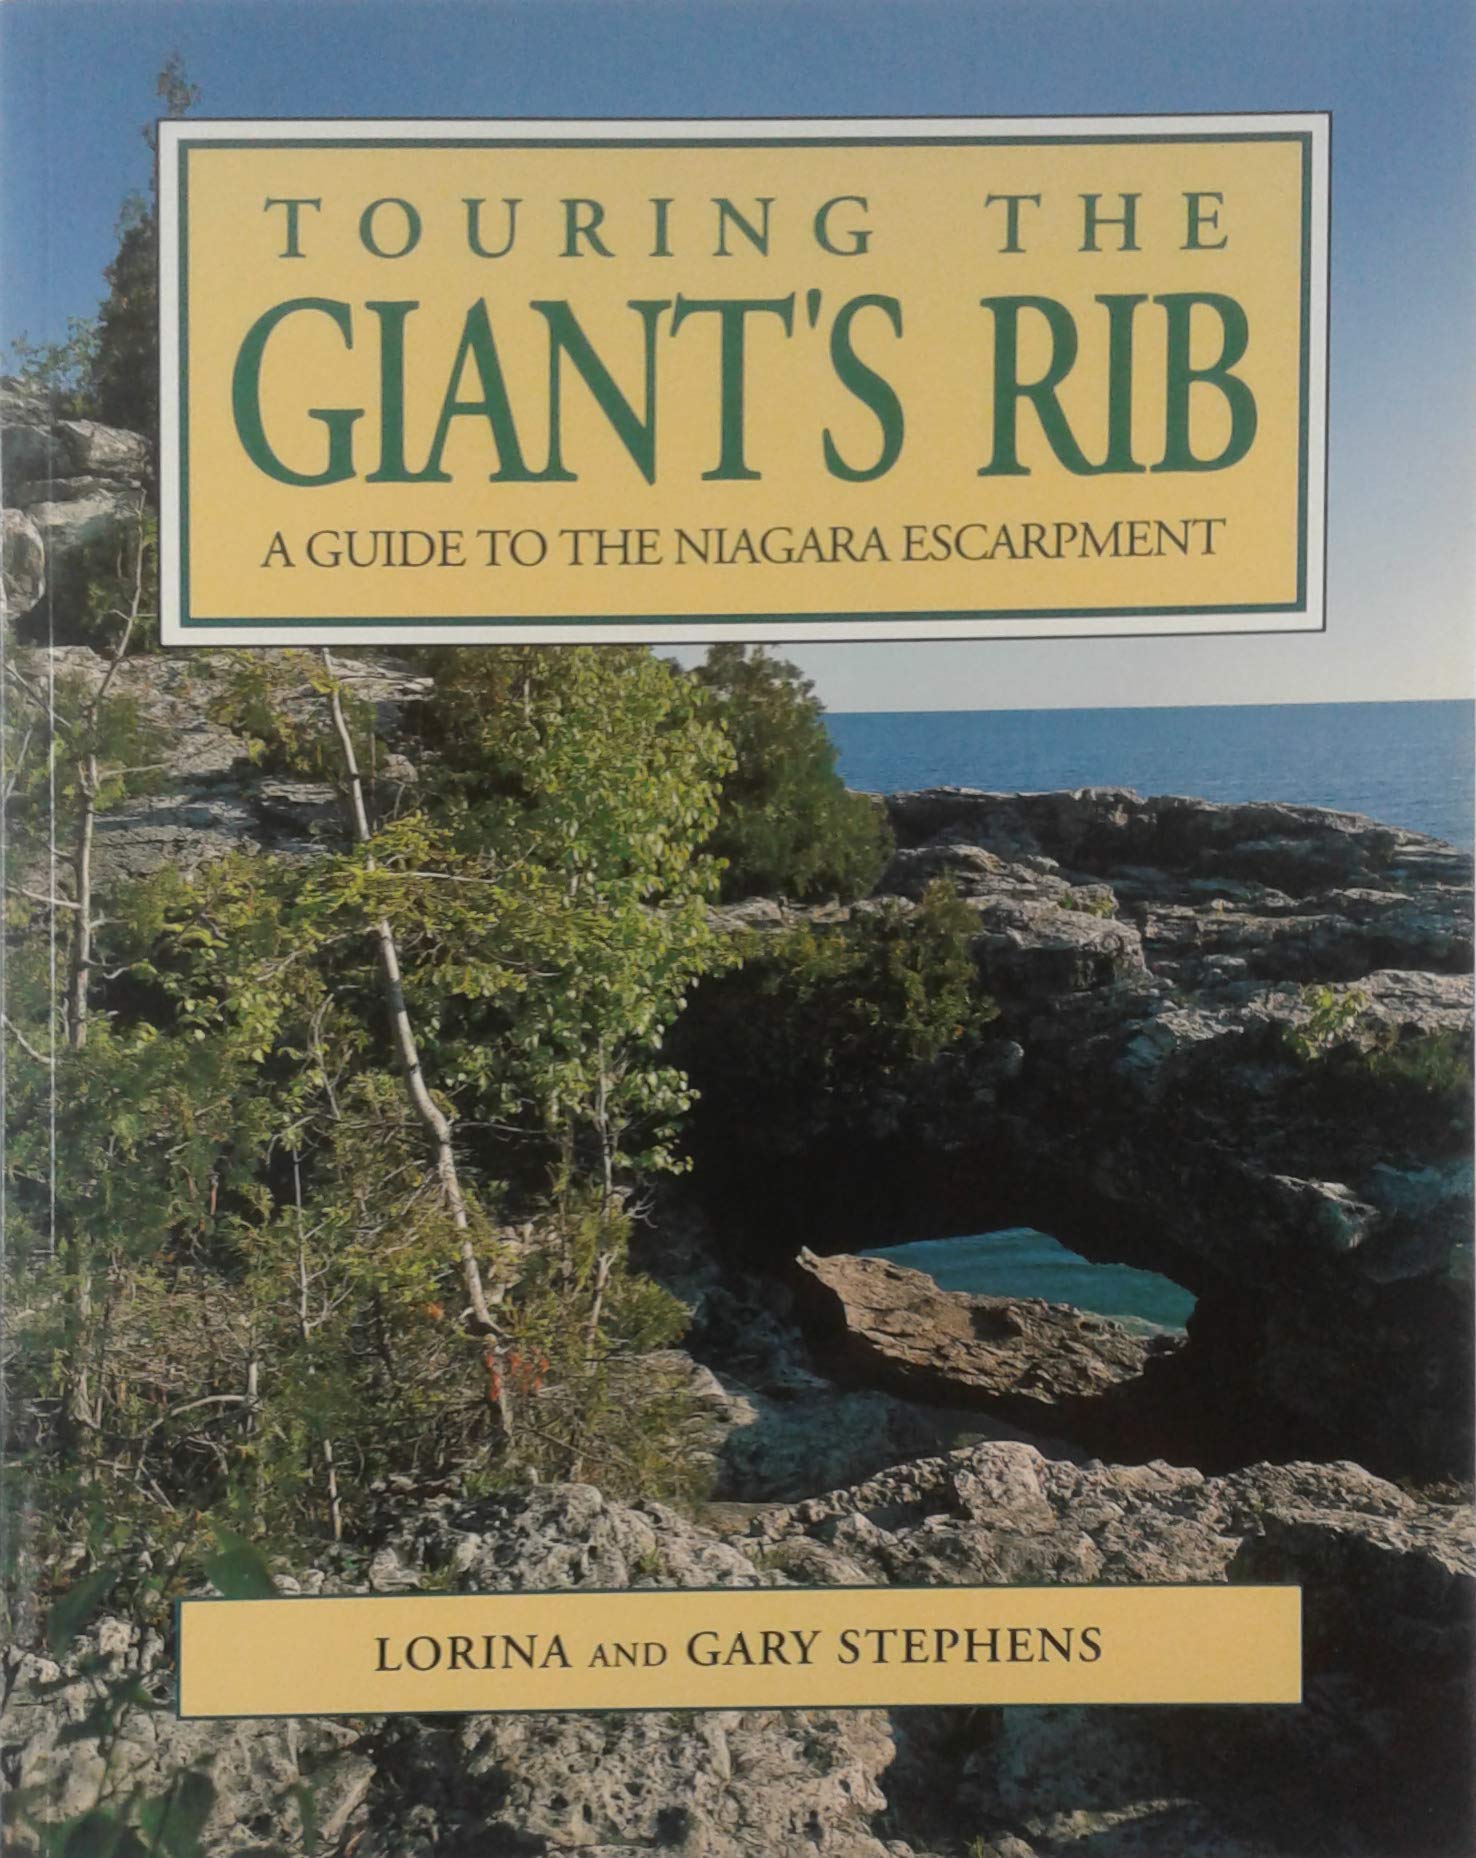 Touring the Giant's Rib: A Guidebook to the Niagara Excarpment by Lorina Stephens